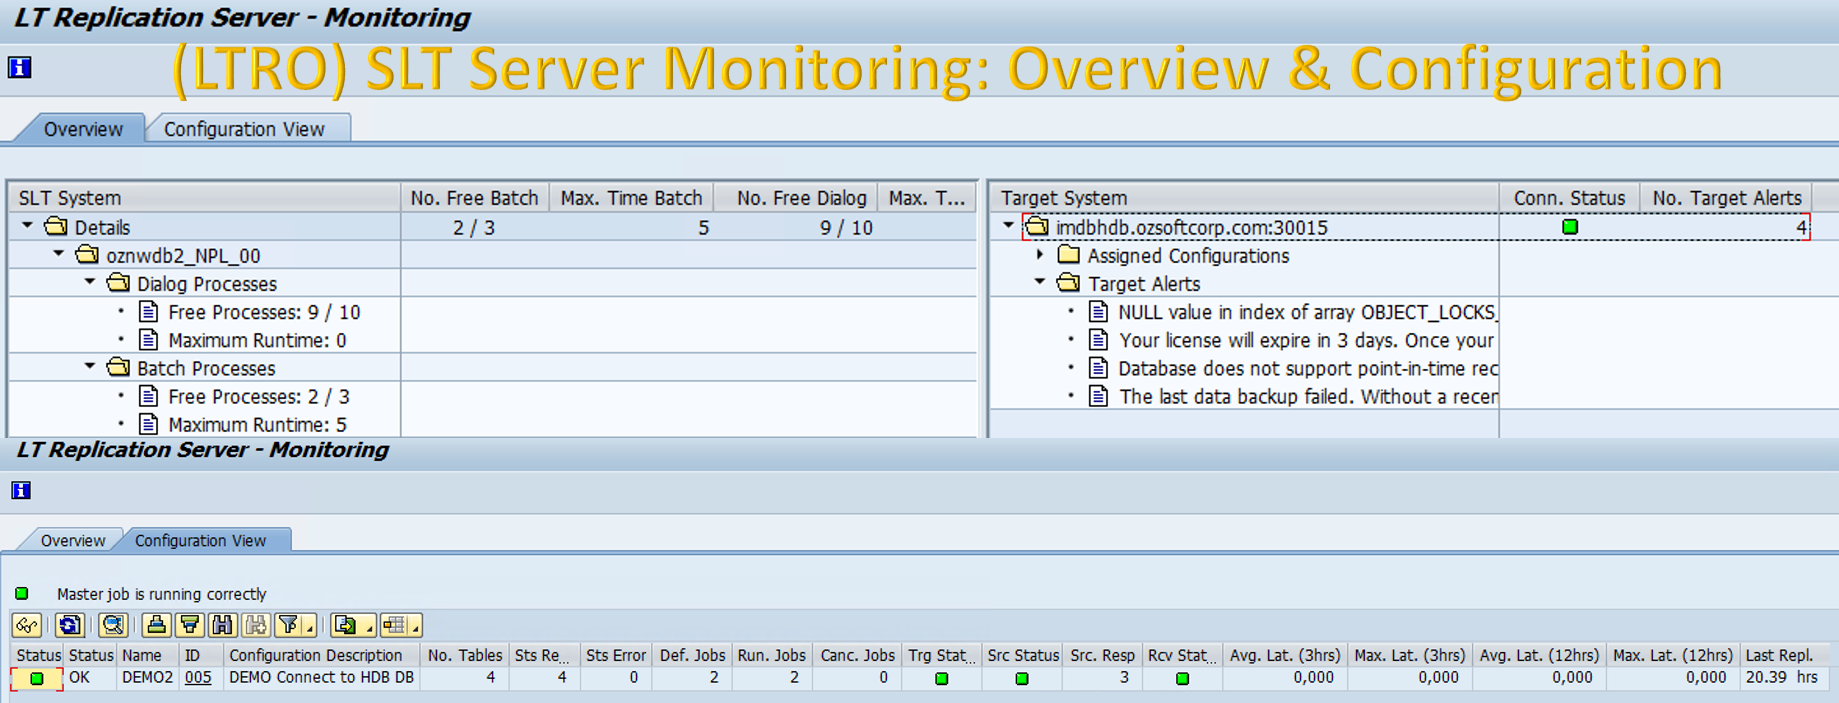 SLT LTRO Server Monitoring Overview and Configuration